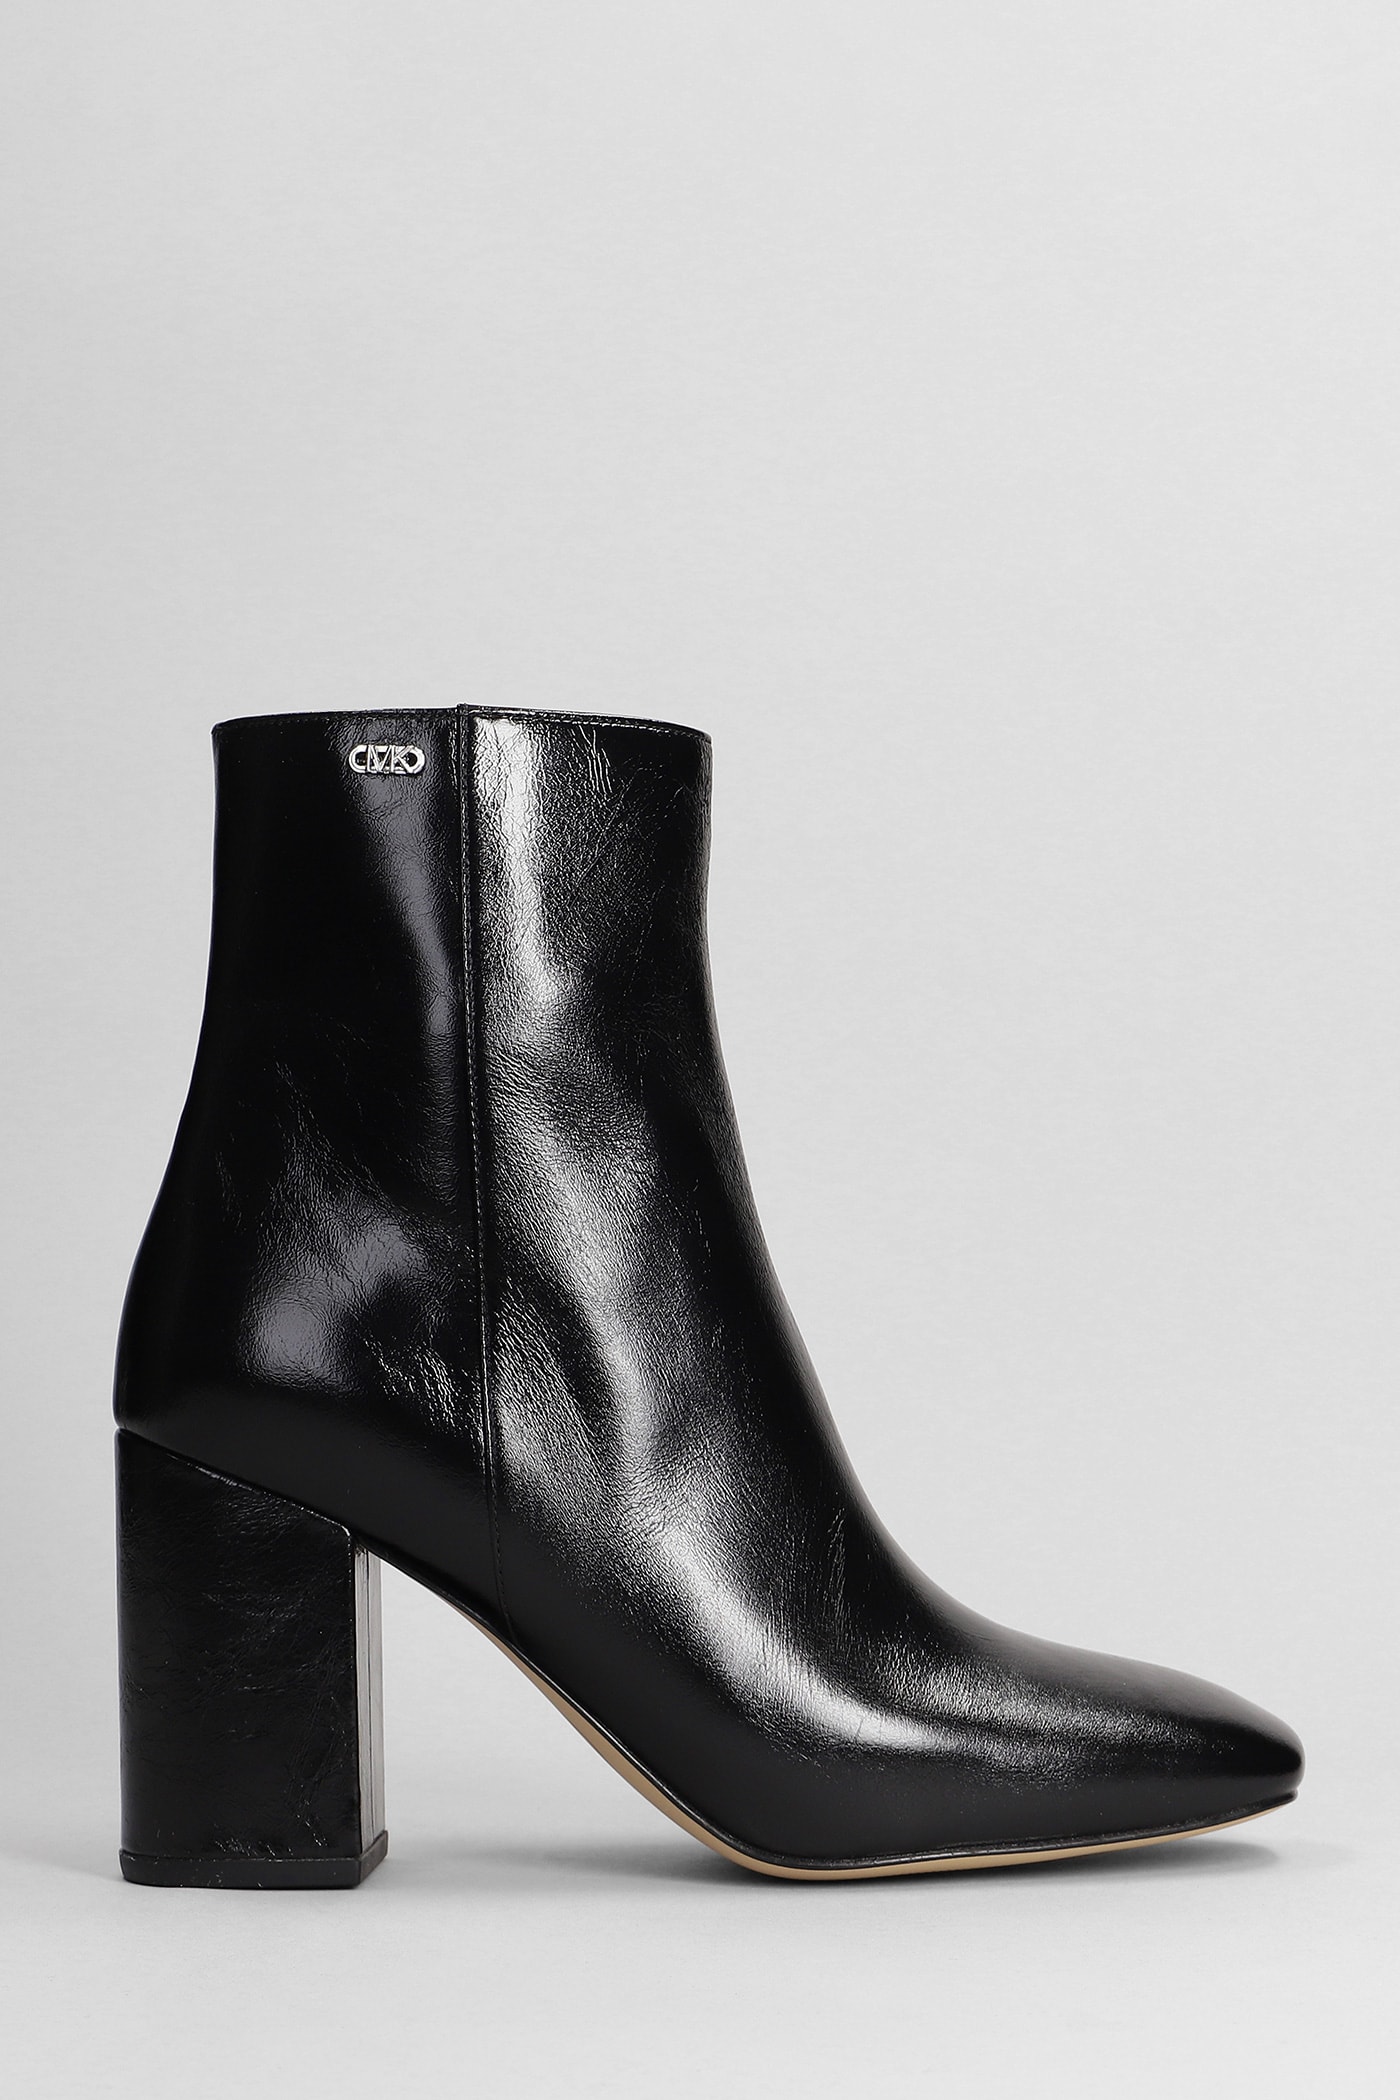 MICHAEL KORS PERLA HIGH HEELS ANKLE BOOTS IN BLACK LEATHER